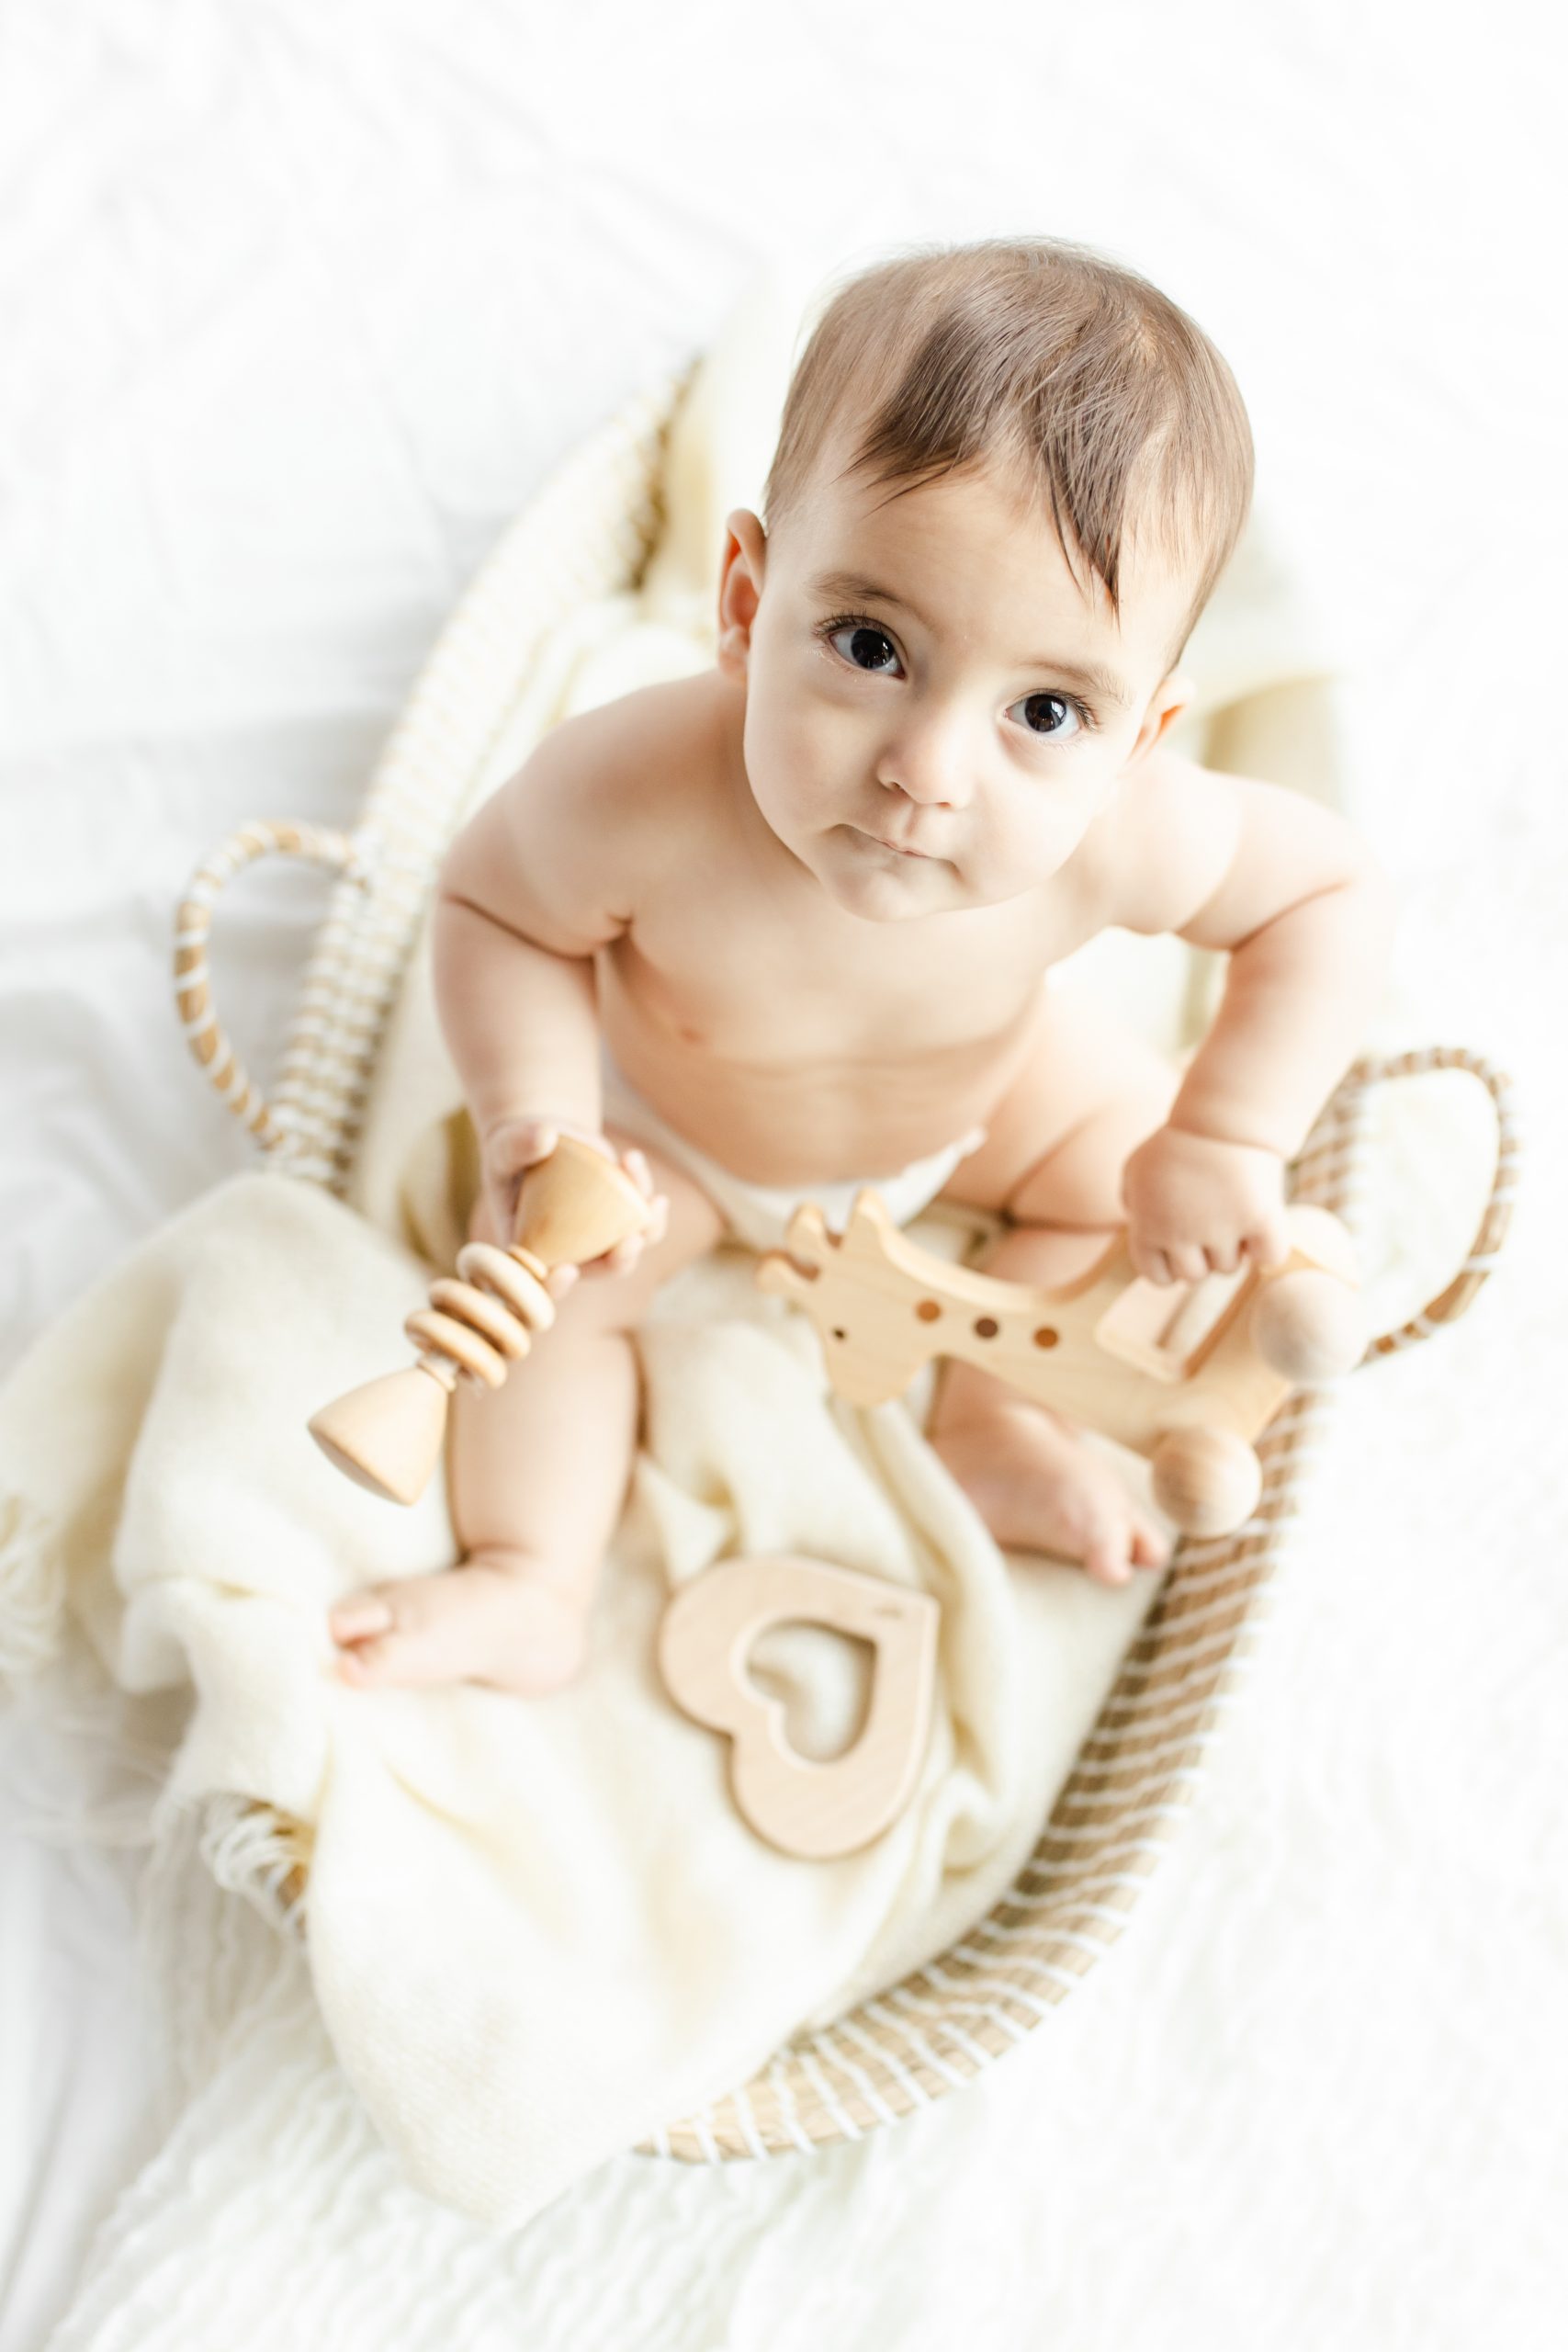 baby sitting in a basket, wooden toys in his hands, looking up at the camera by Northern Virginia Baby Photographer